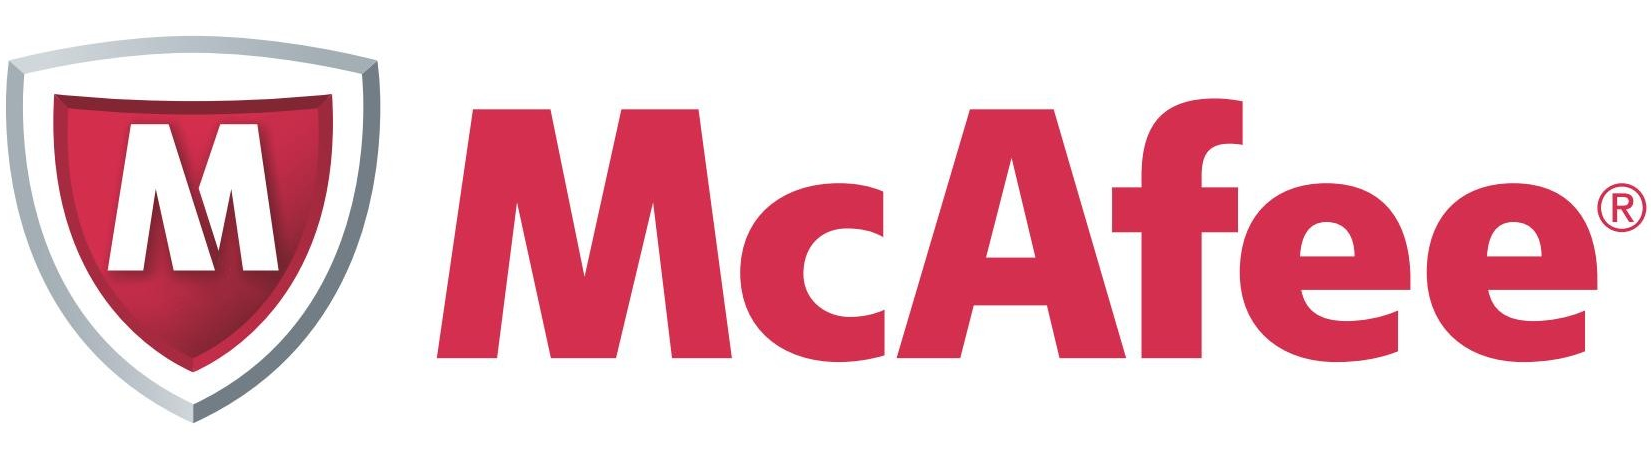 McAfee Complete Endpoint Threat Protection + 1 Year Gold Software Support - License - 1 Node